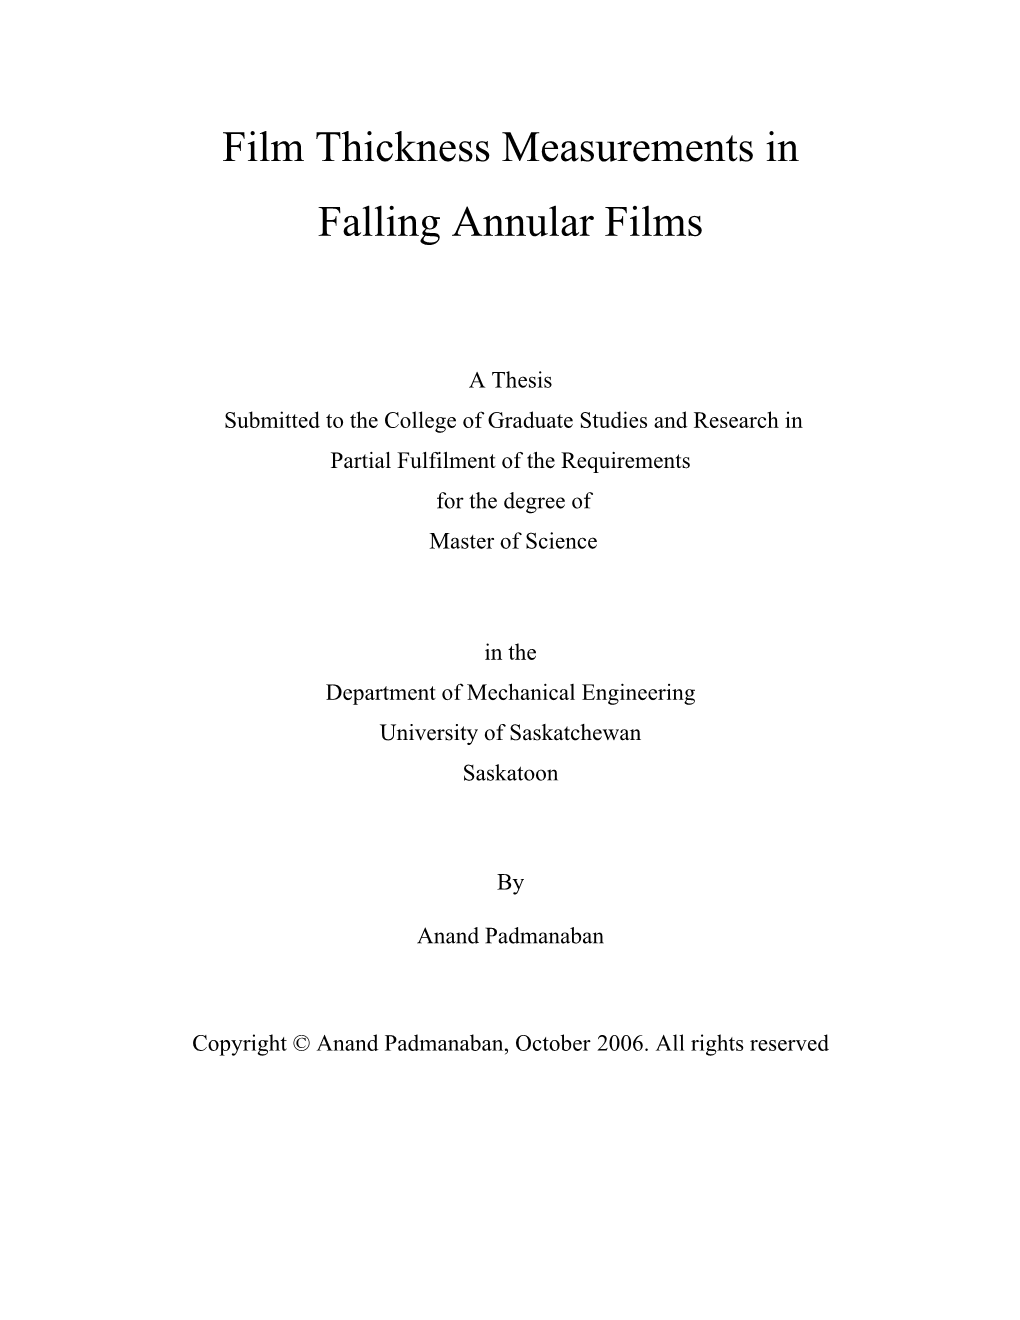 Film Thickness Measurements in Falling Annular Films